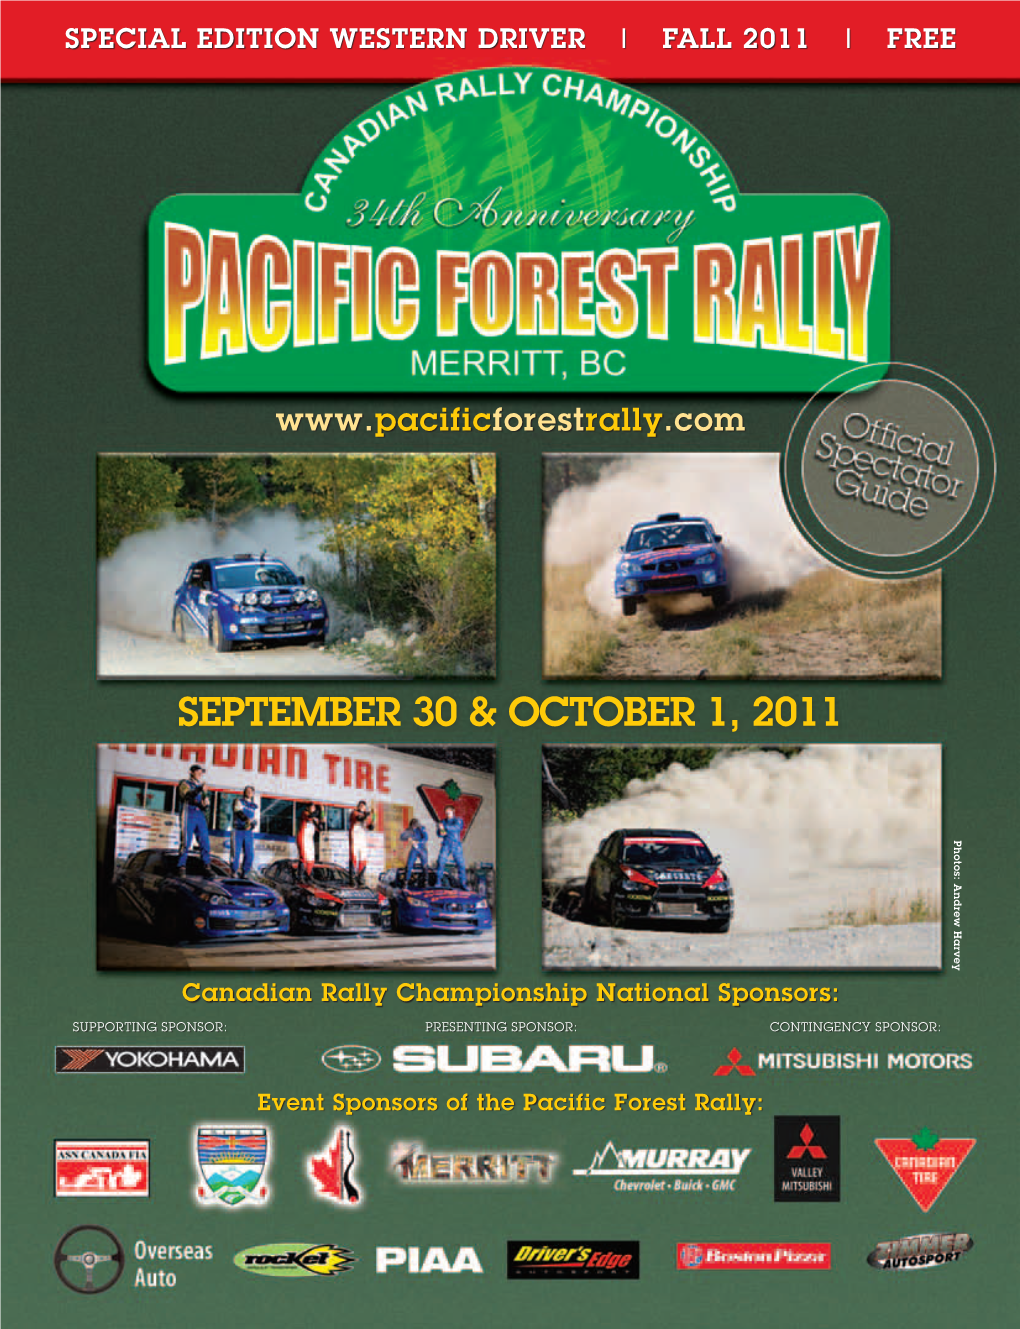 Pacific Forest Rally: the Merritt Hotel Association Welcomes and Supports All Rally Teams and Enthusiasts